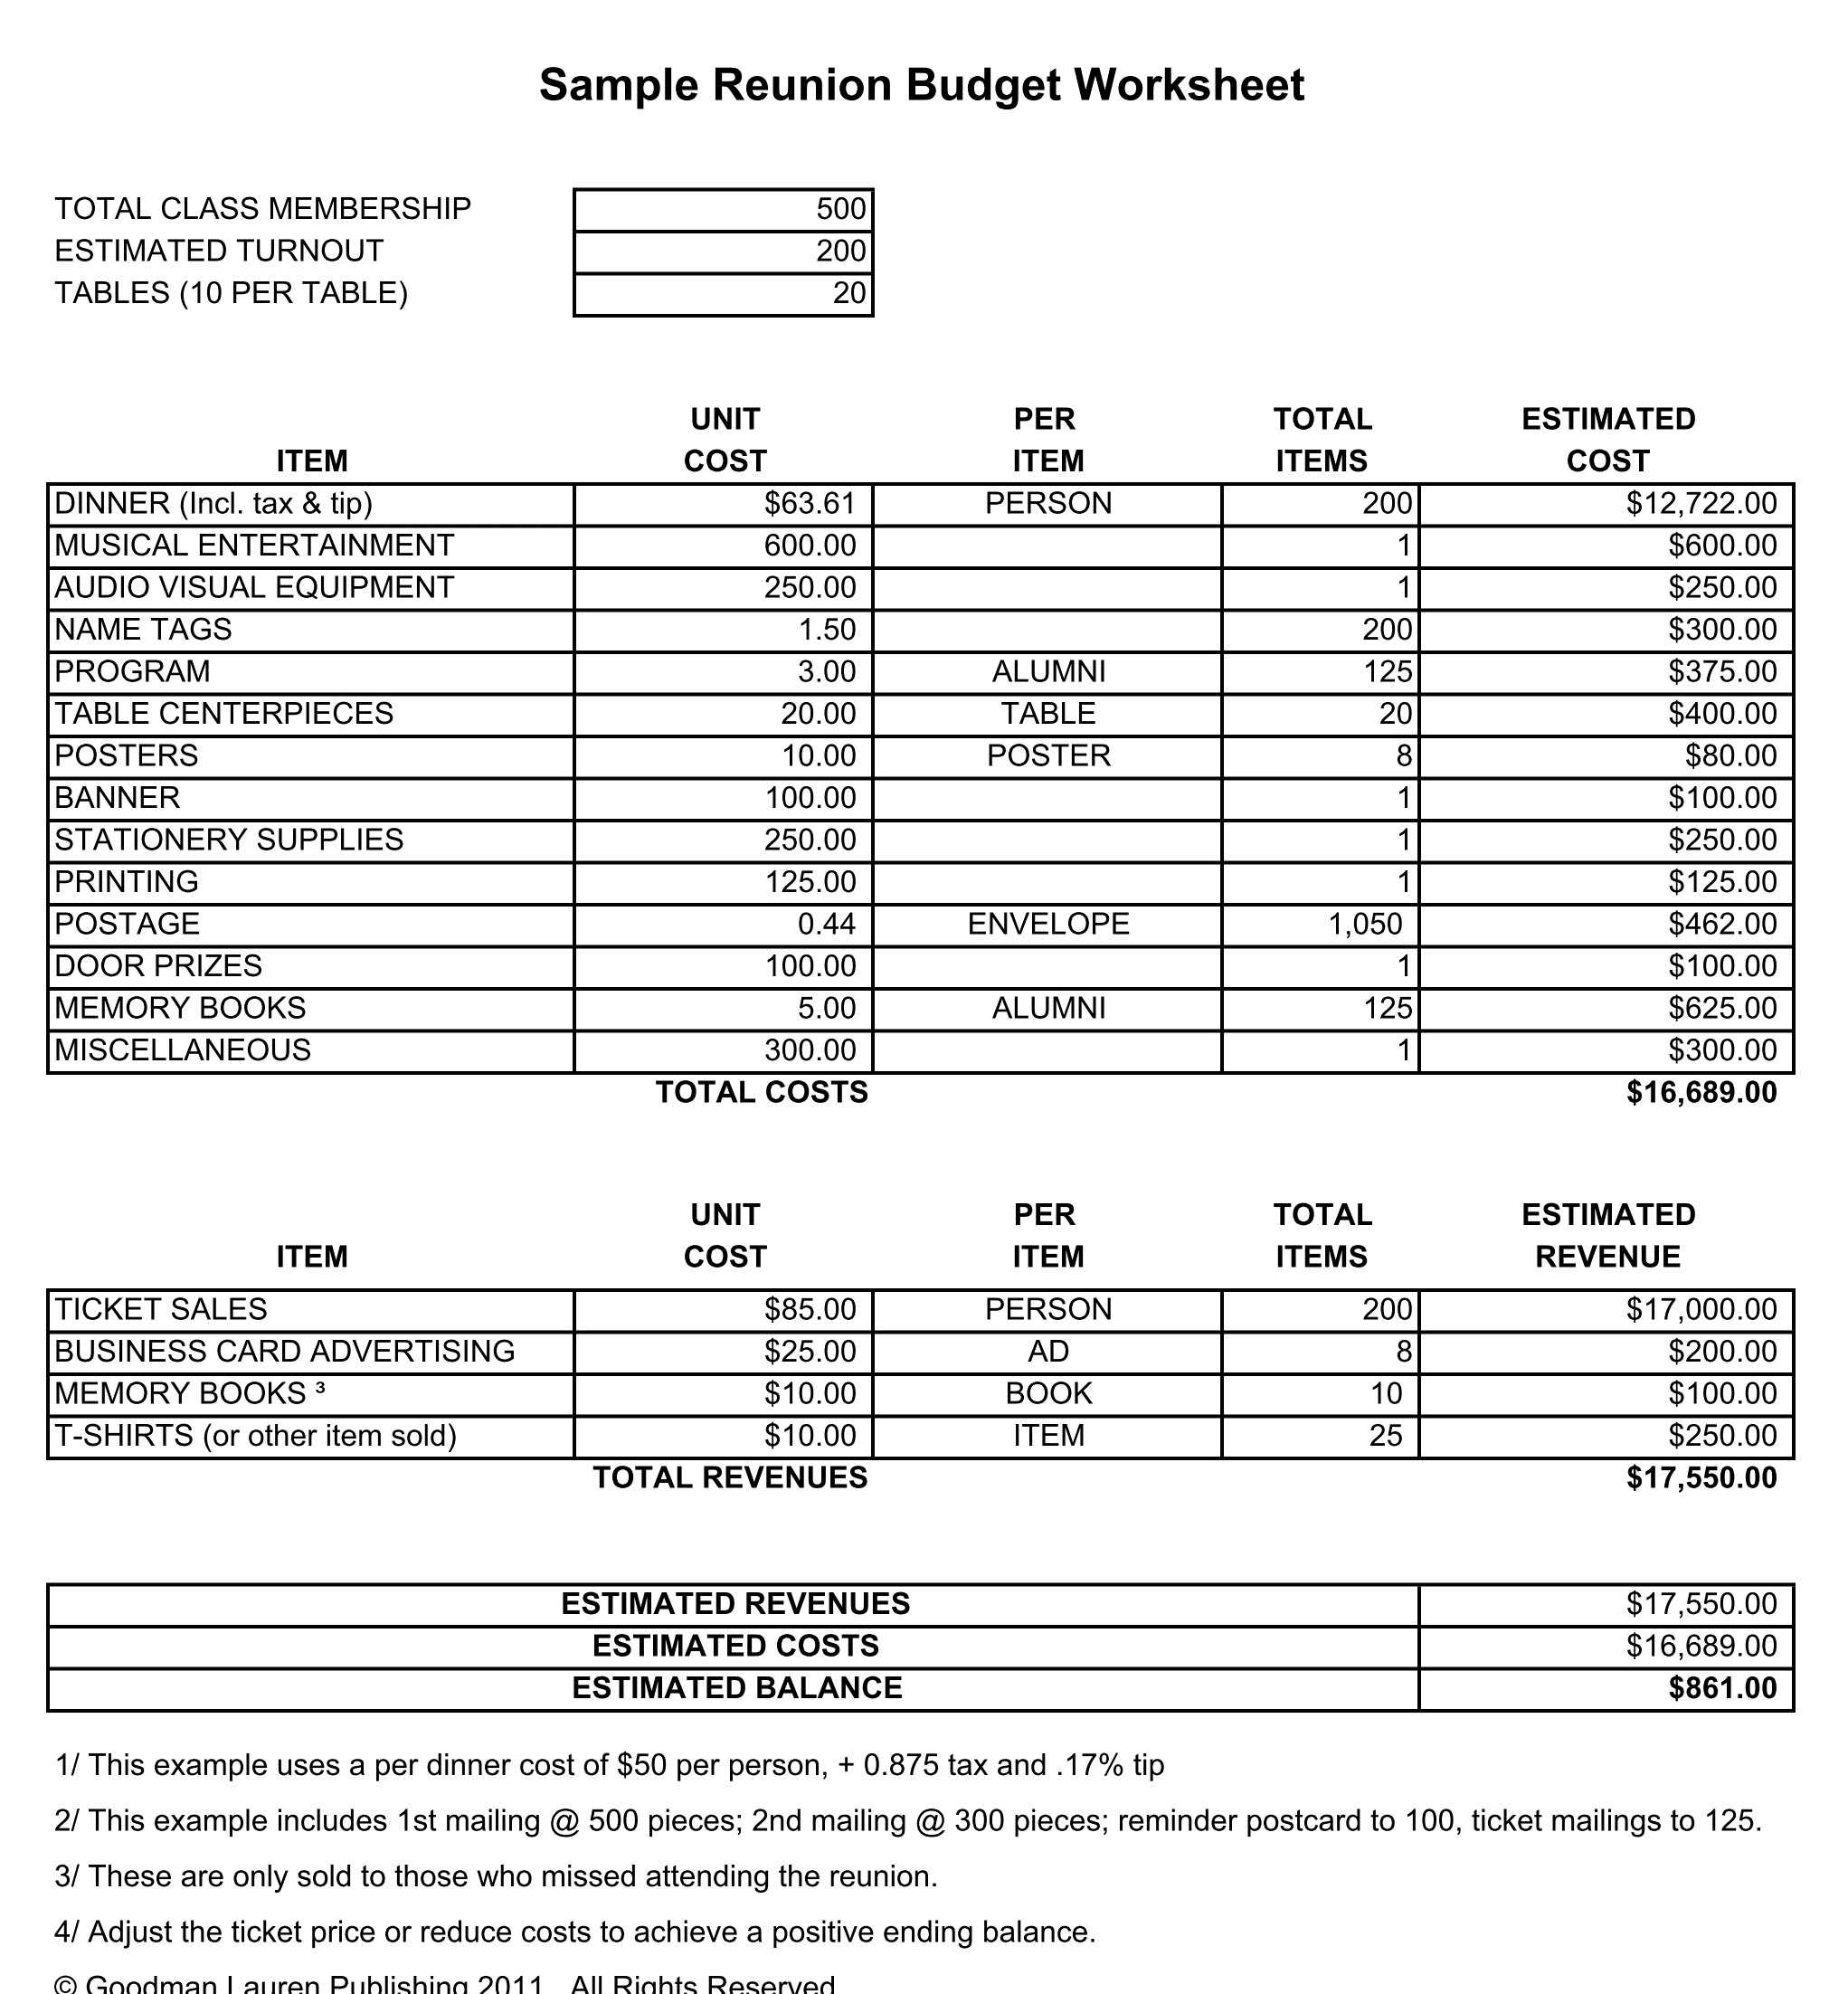 Financial Budget Worksheet as Well as Bud Worksheet Tes New How to Plan A Family Bud Physic